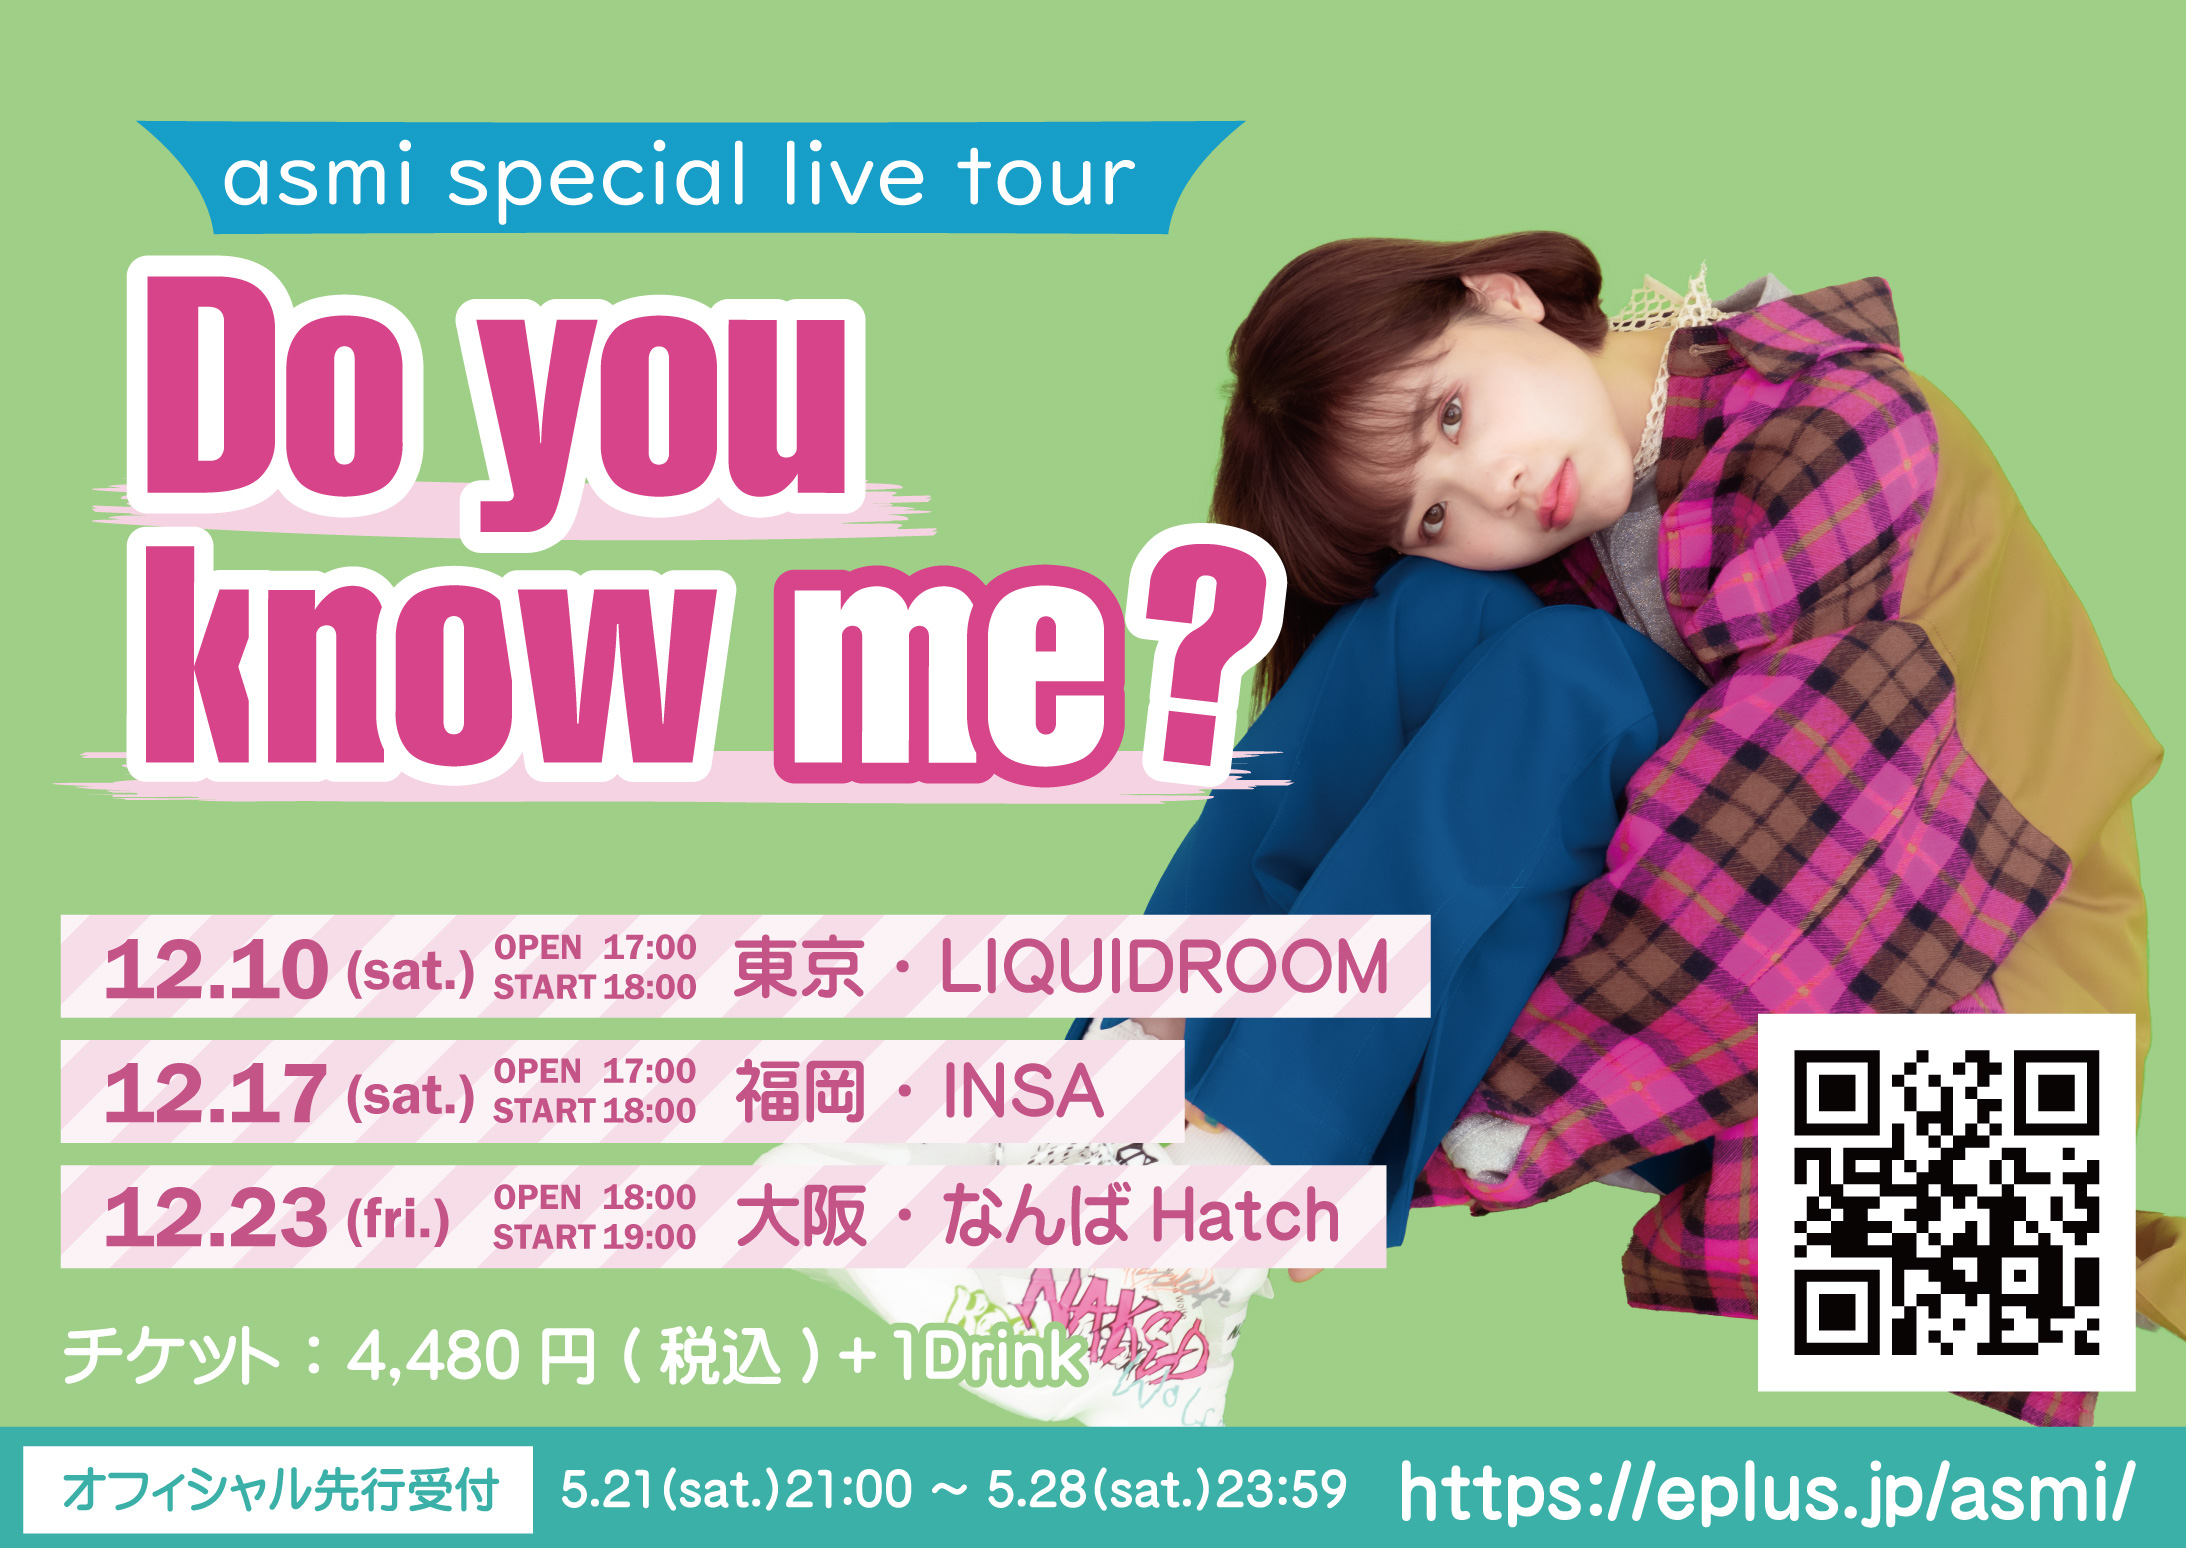 “SNSで最も使われる歌声” asmiが12月にspecial live tour「Do you know me?」開催決定！